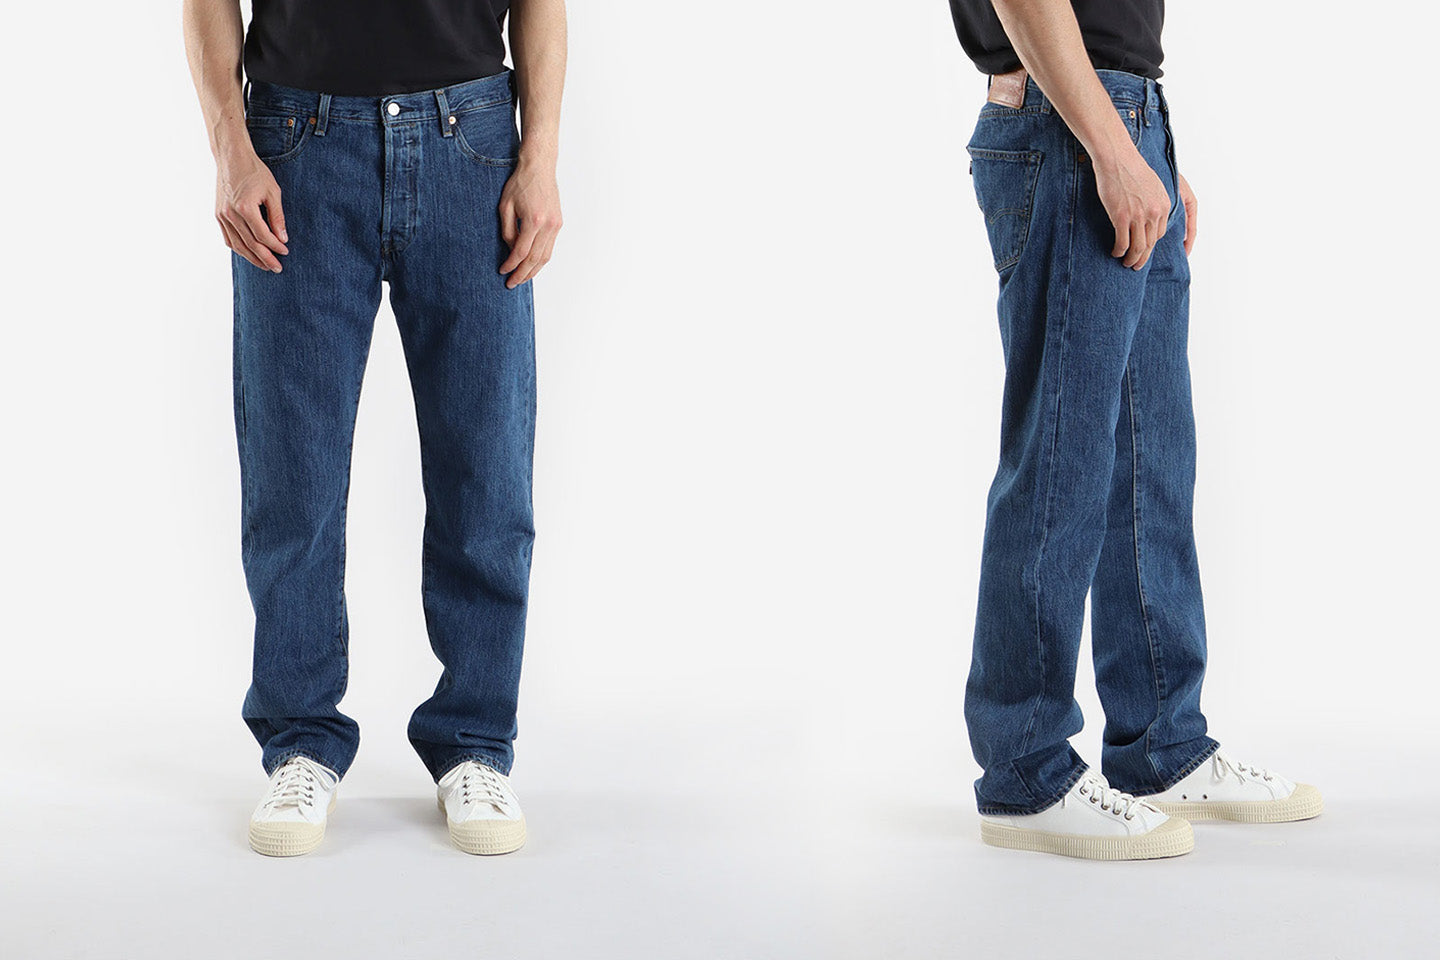 Levi's Fit Guide | How do Levi's Jeans Fit? – Urban Industry